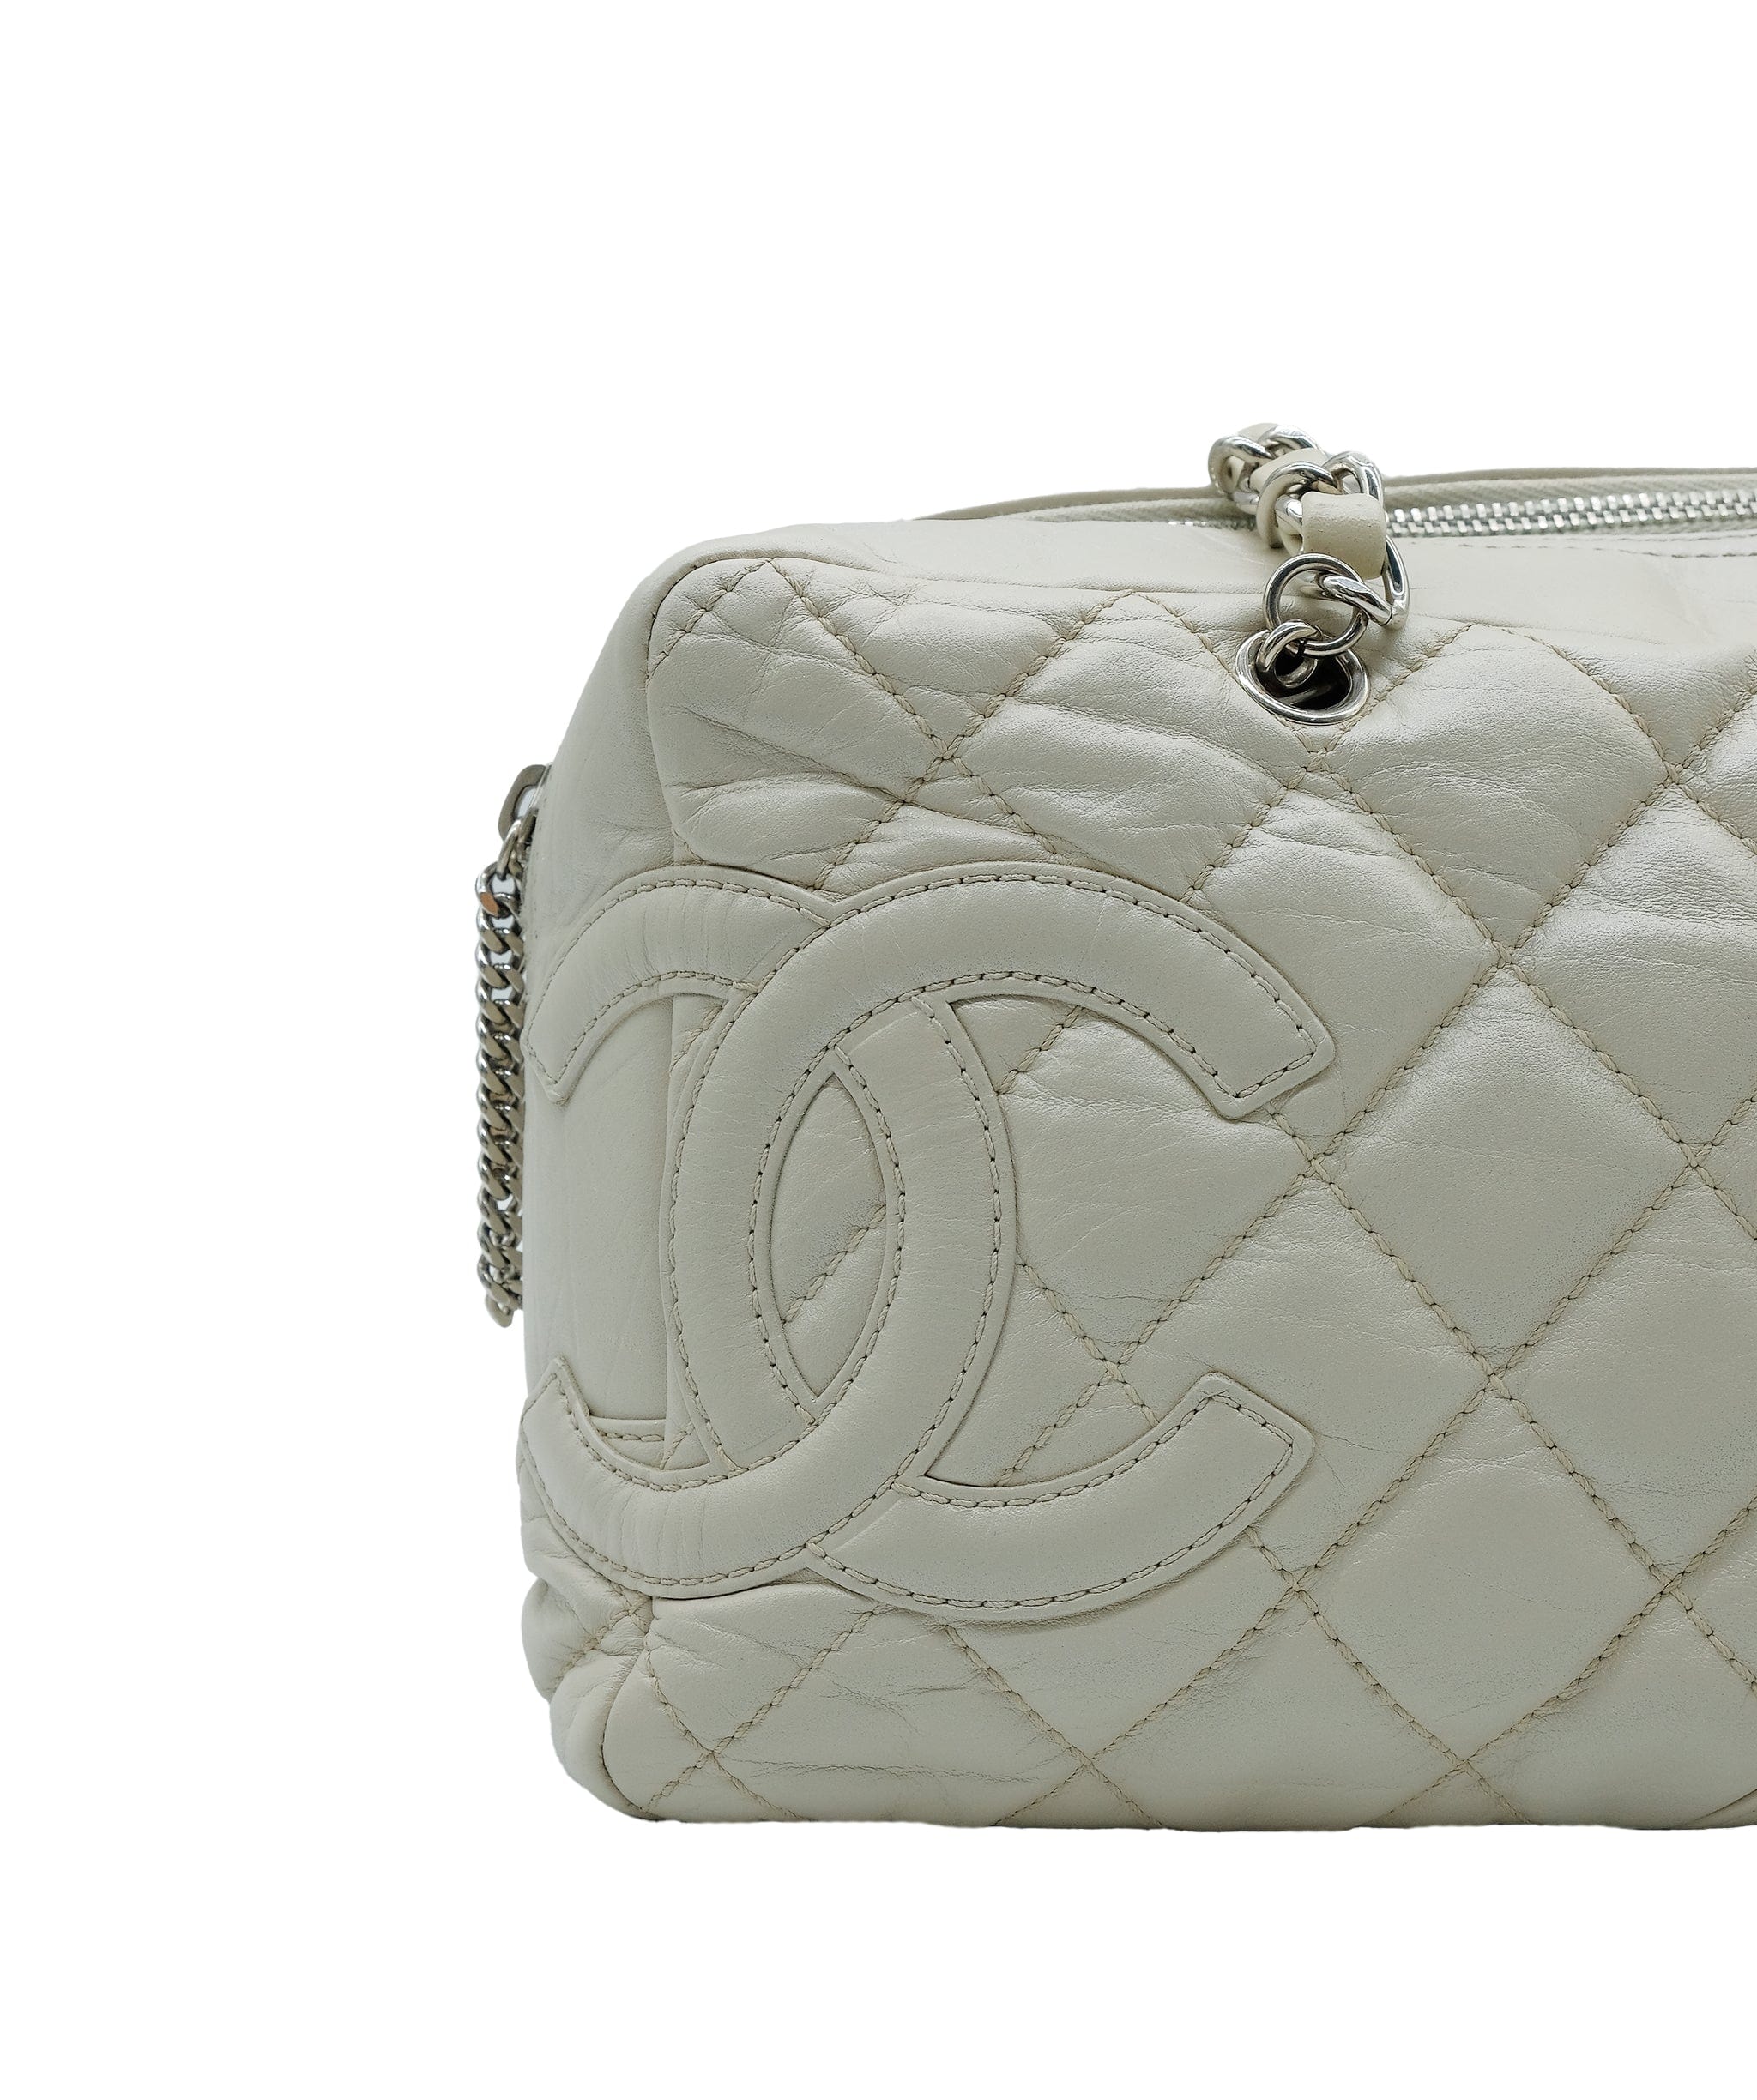 Chanel Chanel chained cambon bag cream SHW AVC1894